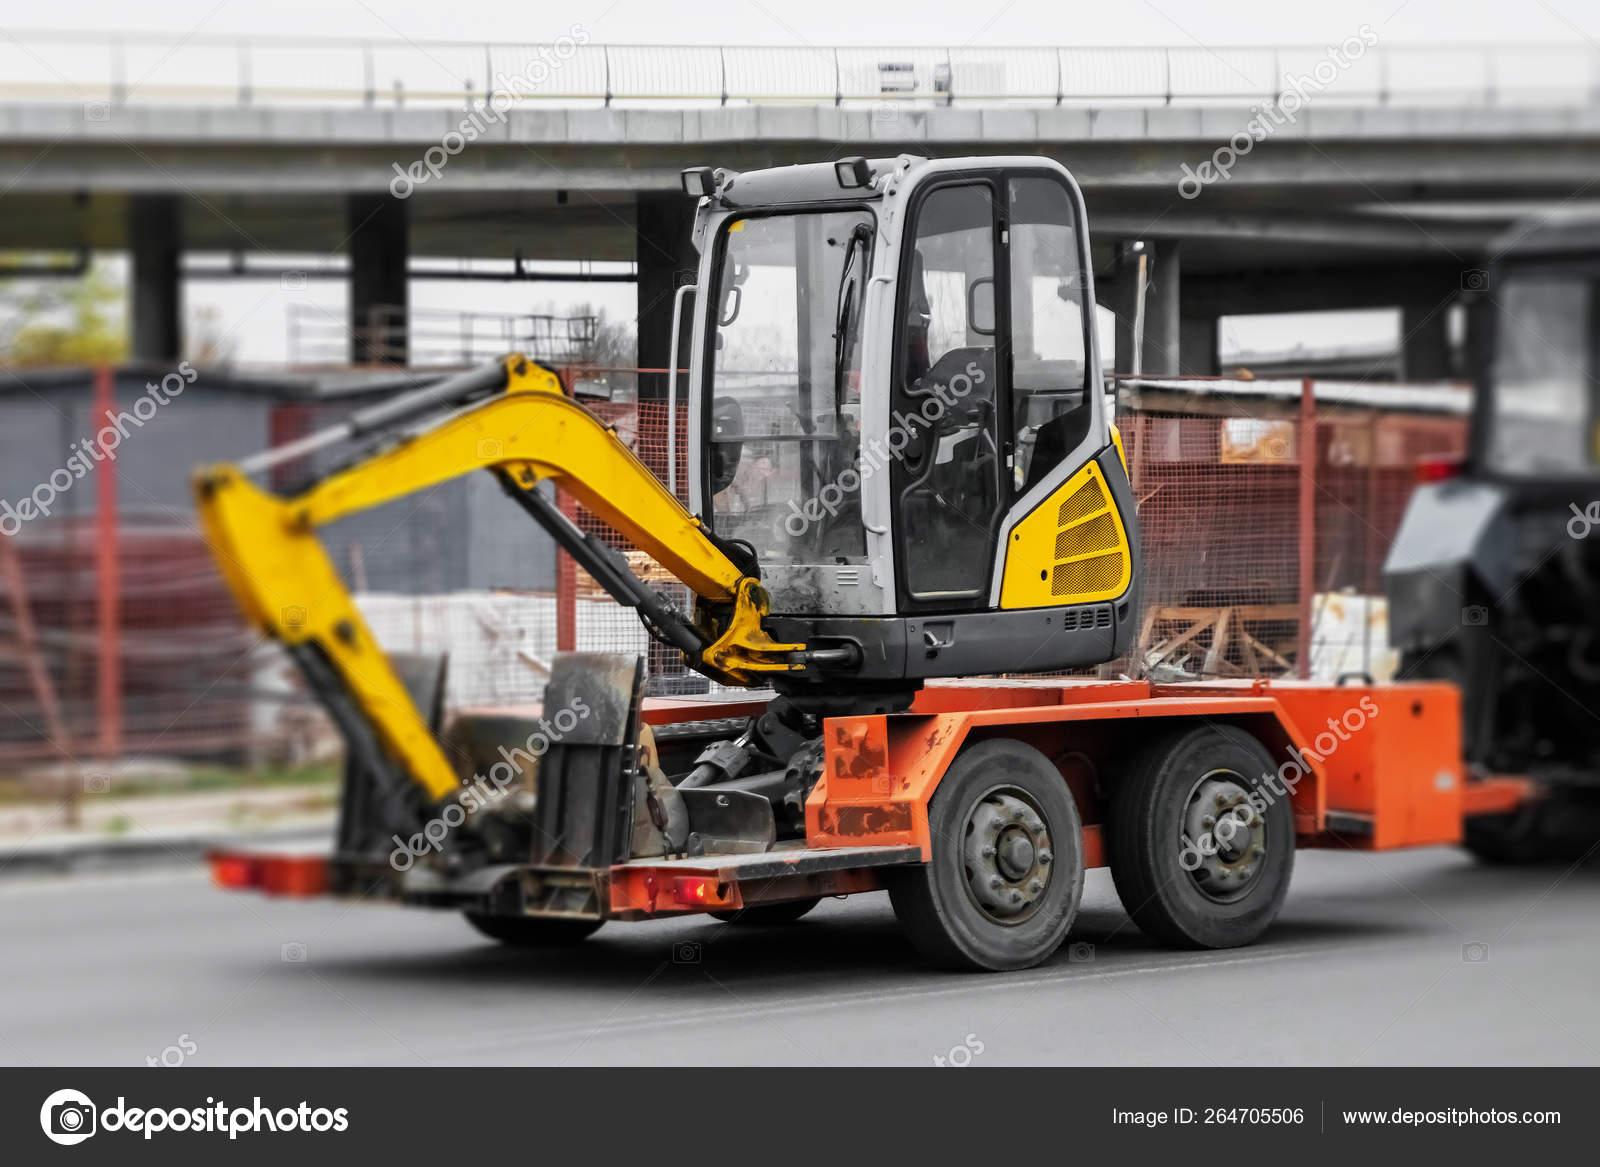 Transportation of construction equipment, a small excavator on a